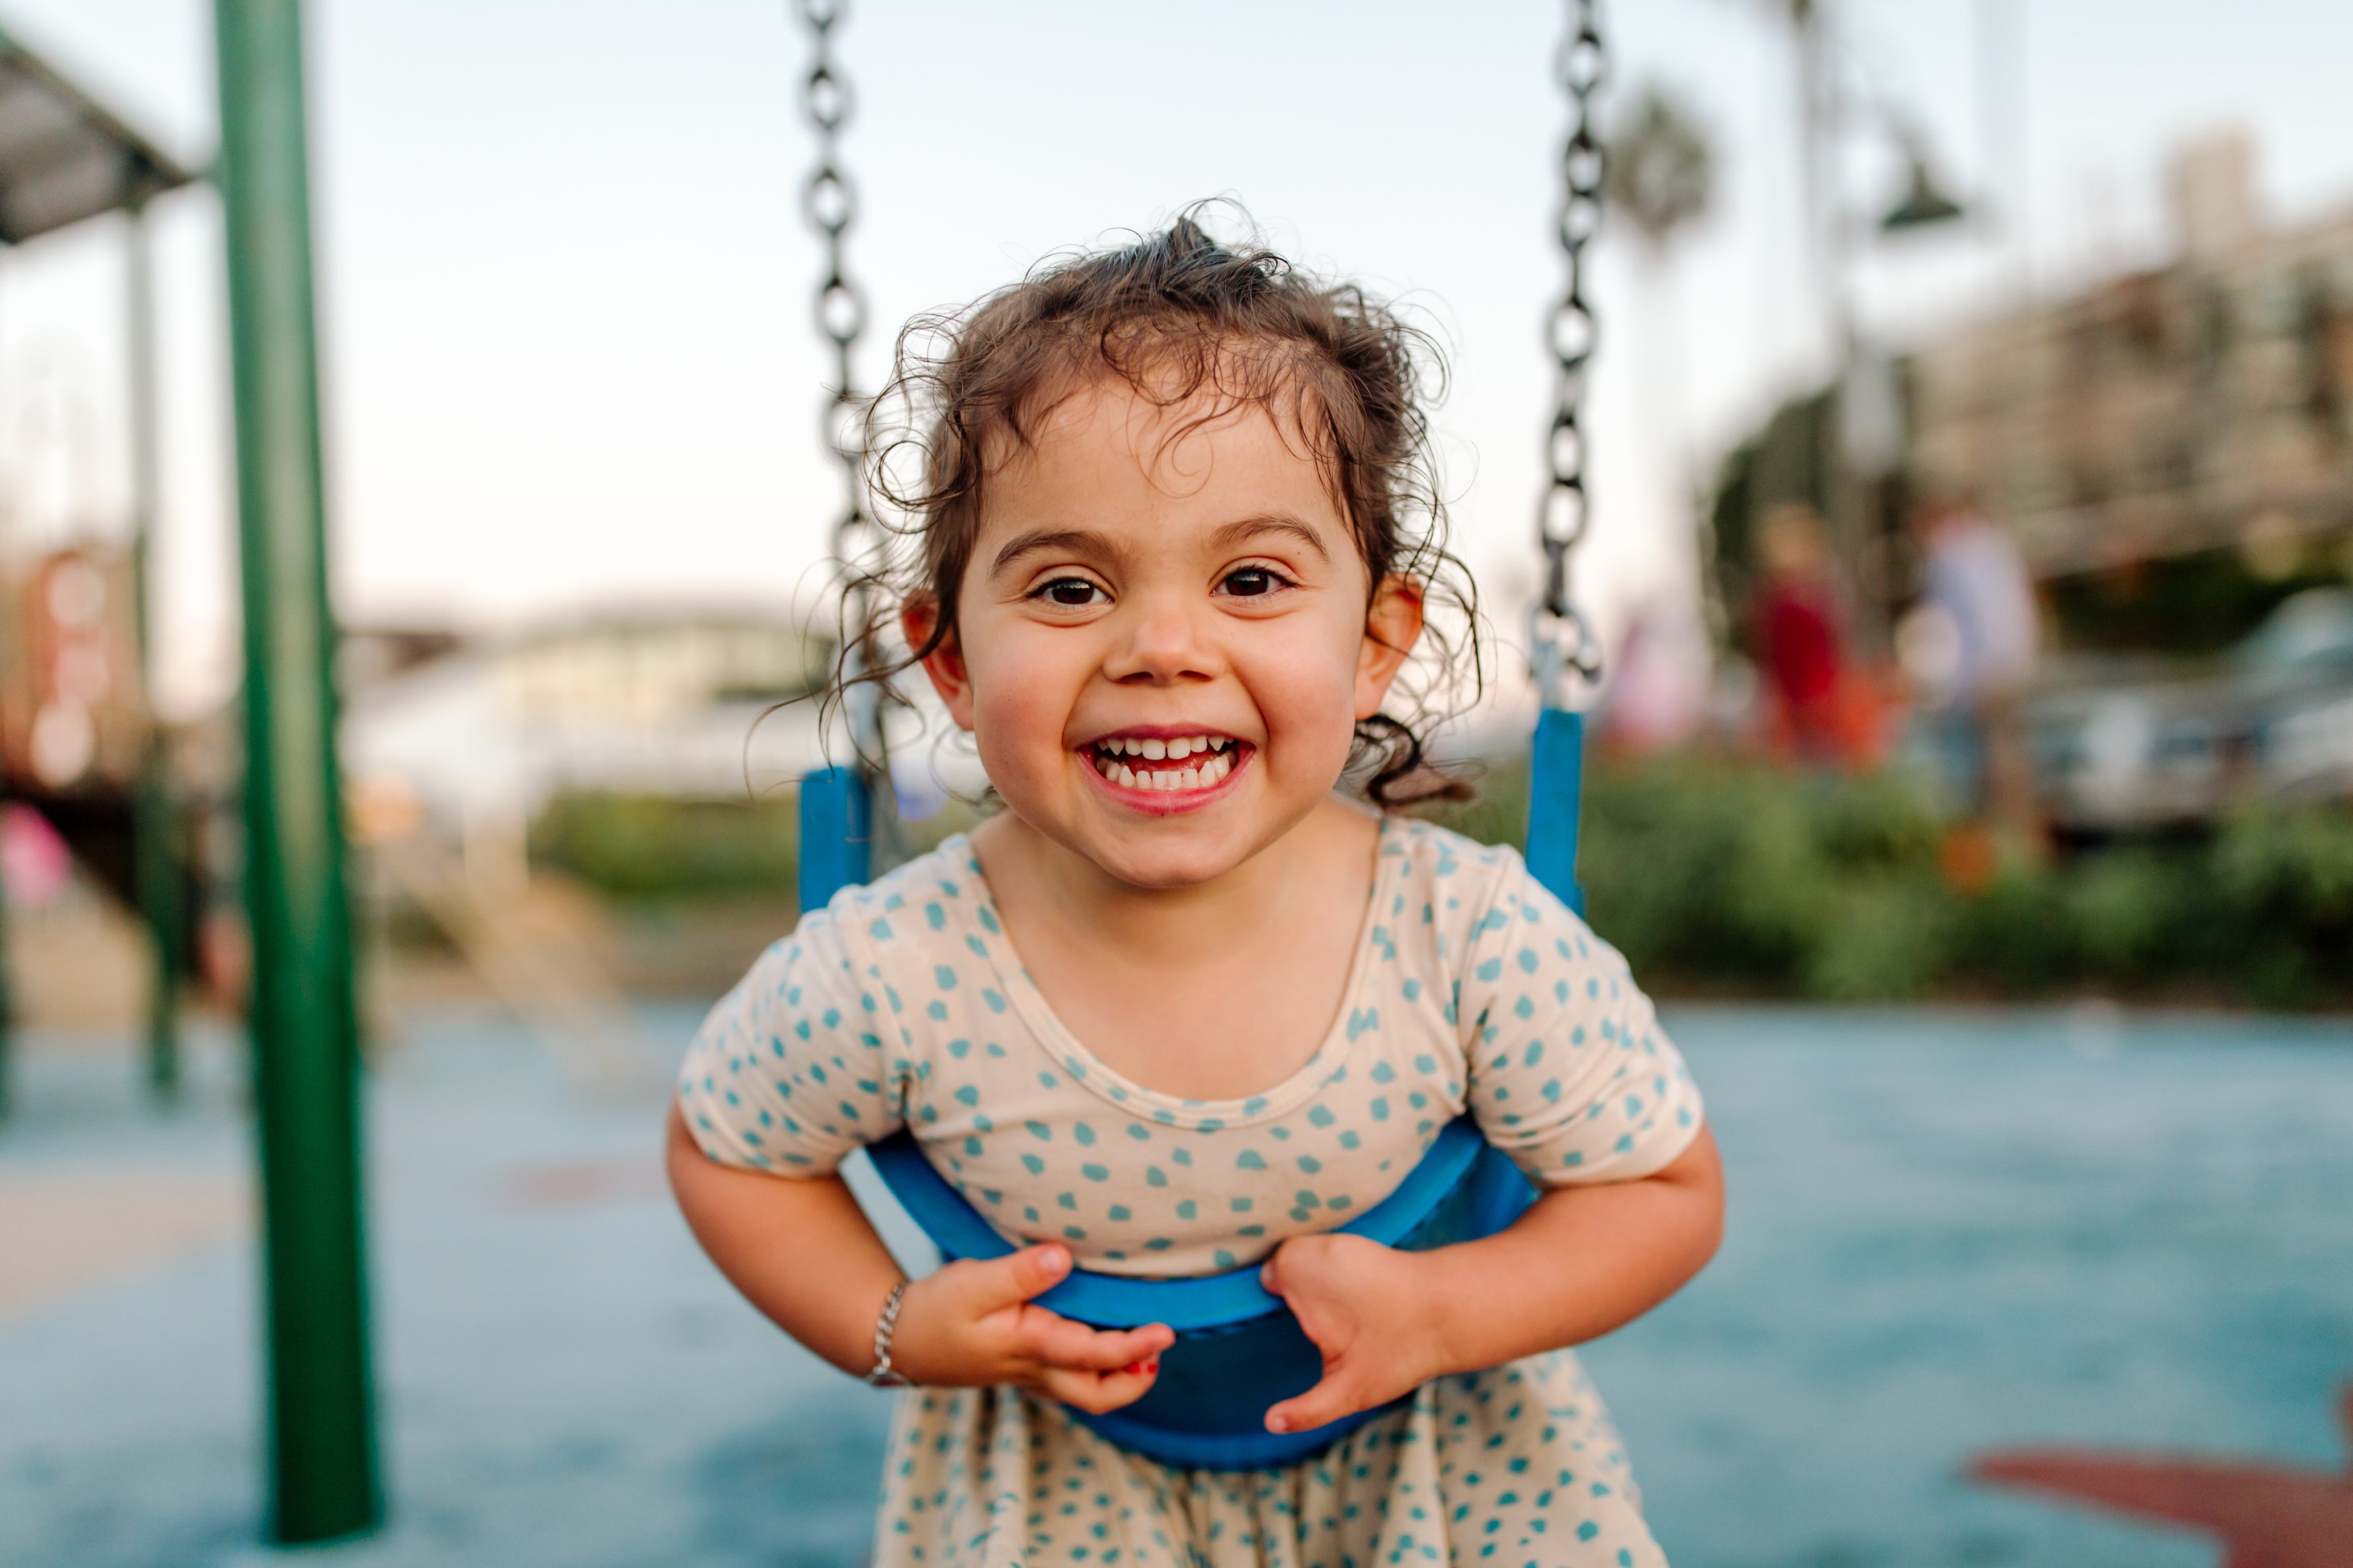 Celebrating the Build a World of Play Challenge with this image of a young girl with curly wet hair smiling at the camera. She is leaning on a blue swing and wearing a yellow dress with blue dots. In the blurry background is a playground.